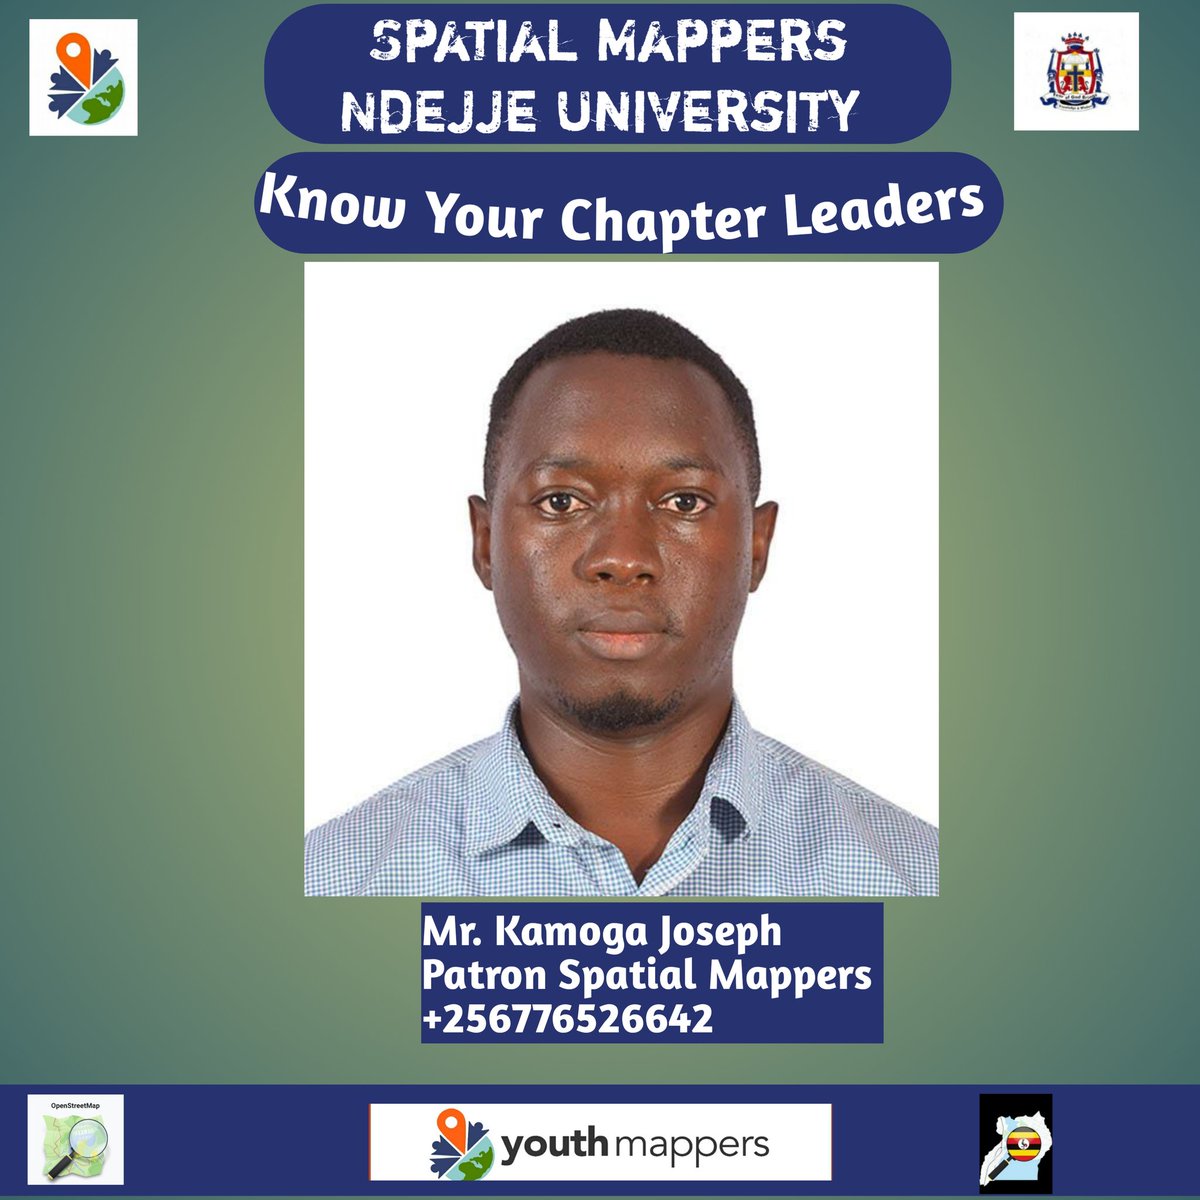 📢 Join us in welcoming Mr. Kamoga Joseph as our esteemed patron for Spatial Mappers at Ndejje University
We are thrilled to have you on board to guide and inspire us on our journey of mapping the world. With his wealth of knowledge and experience, we are set to reach new heights